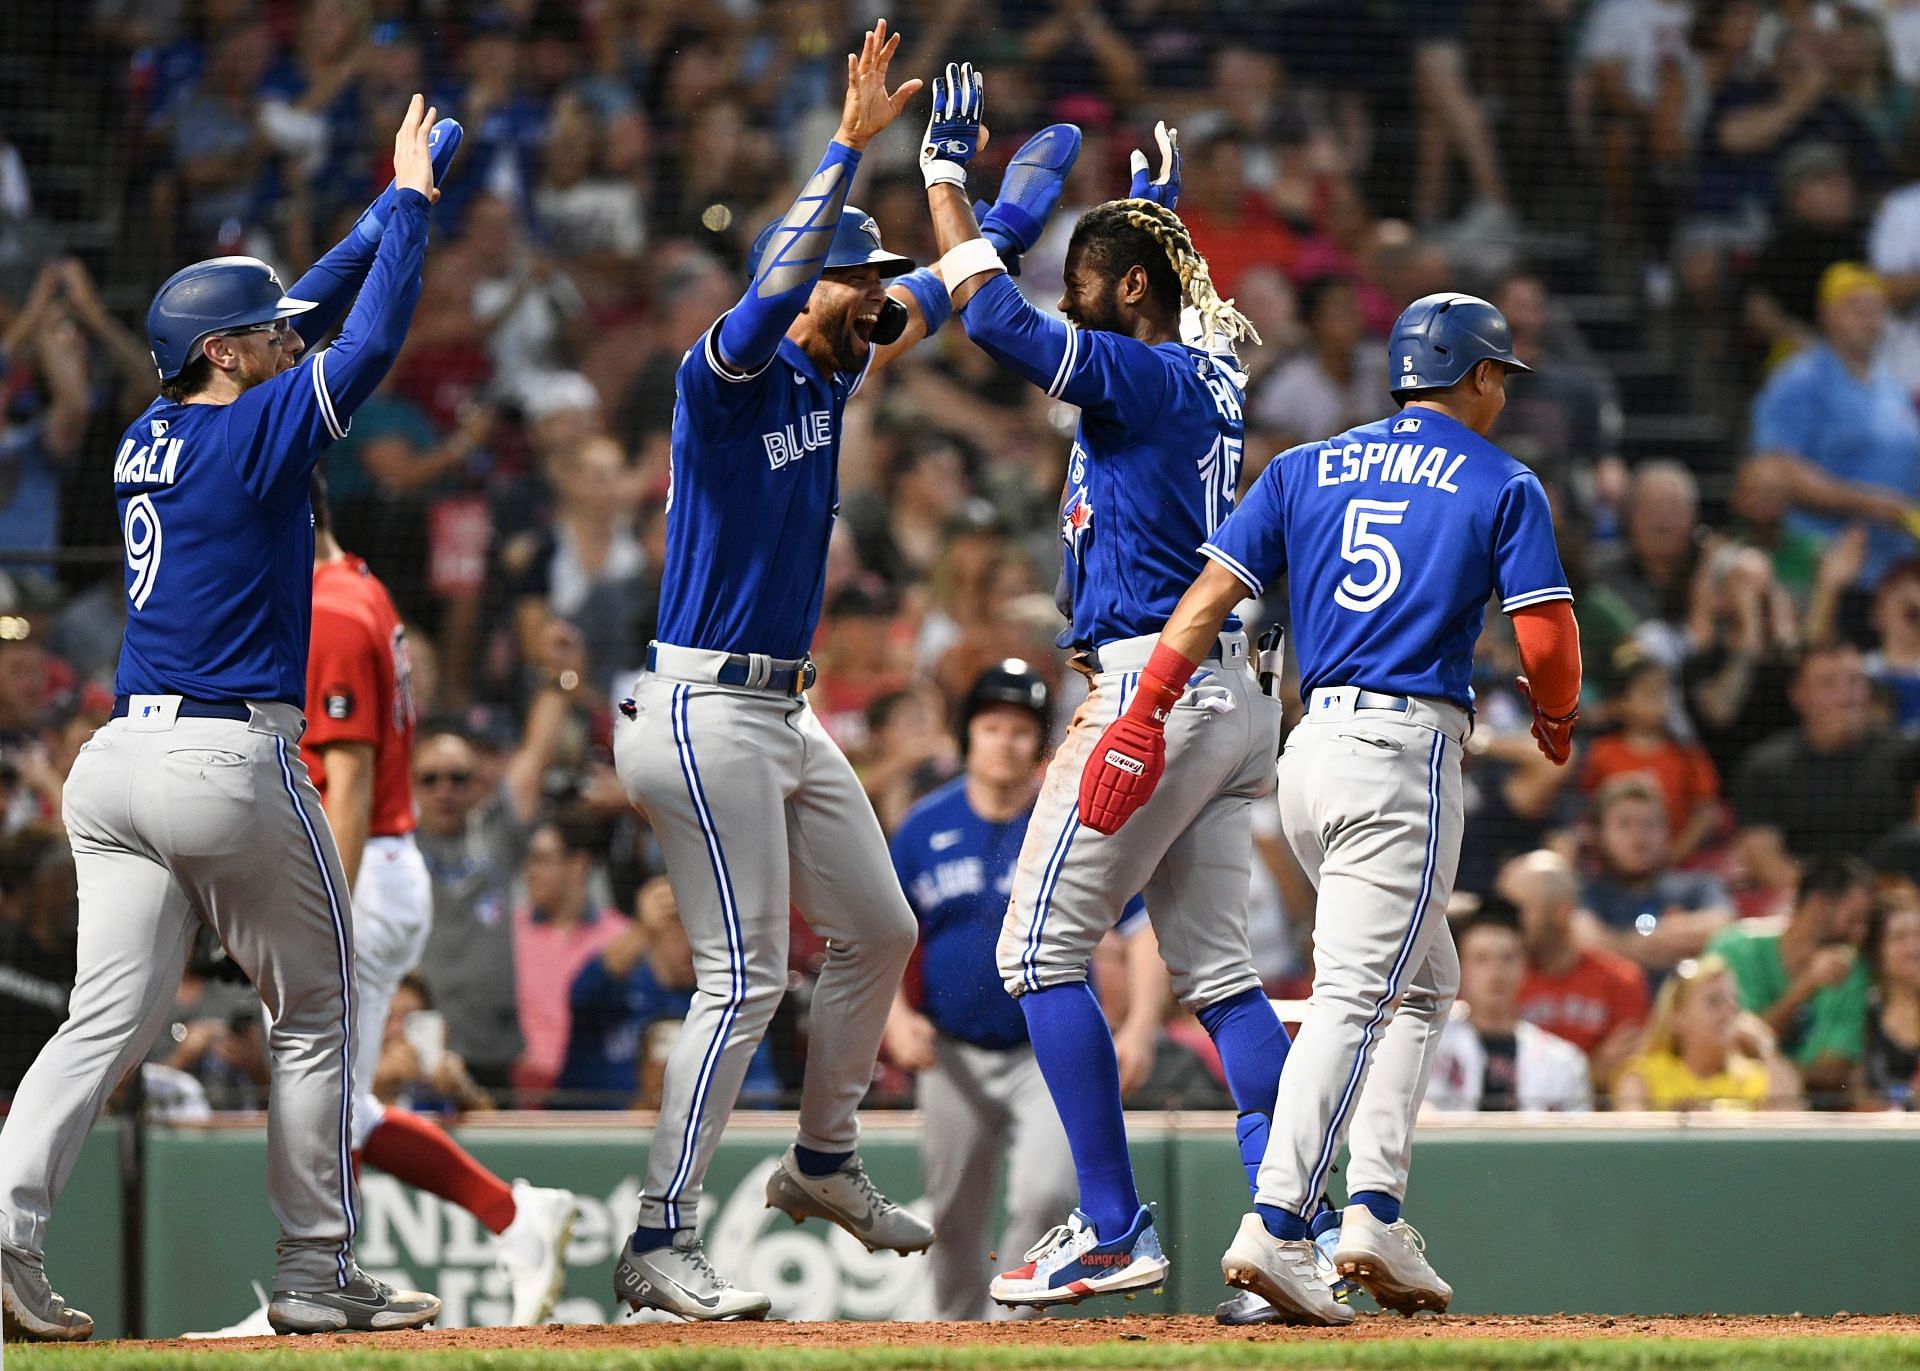 The Blue Jays will be back home on Tuesday.